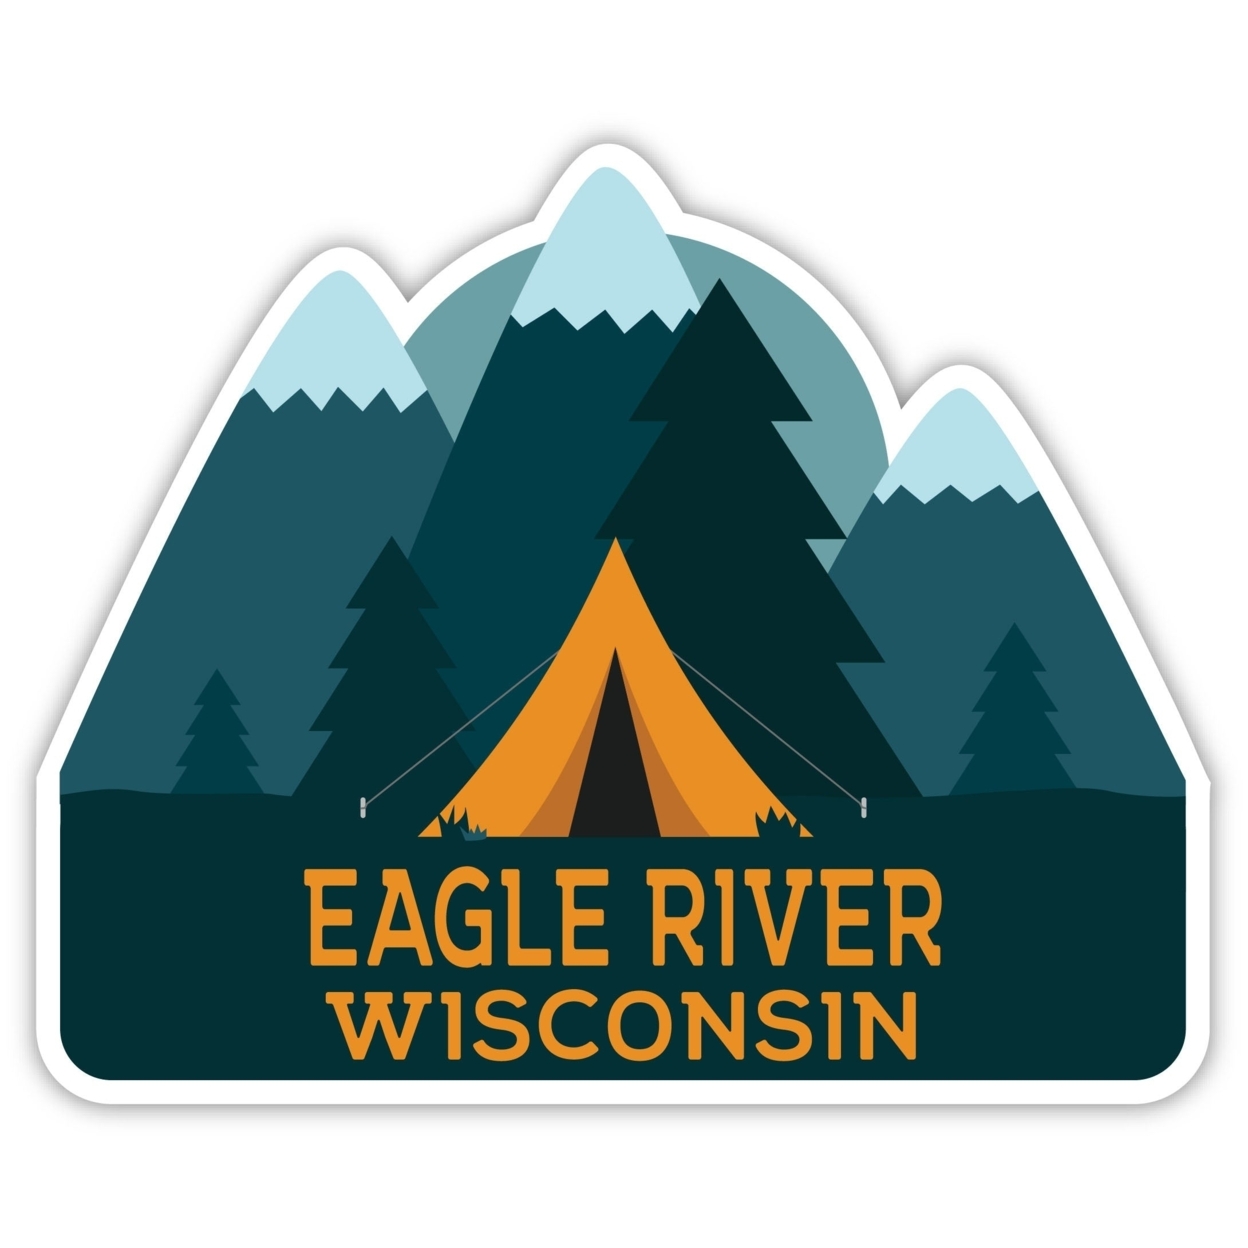 Eagle River Wisconsin Souvenir Decorative Stickers (Choose Theme And Size) - Single Unit, 2-Inch, Camp Life